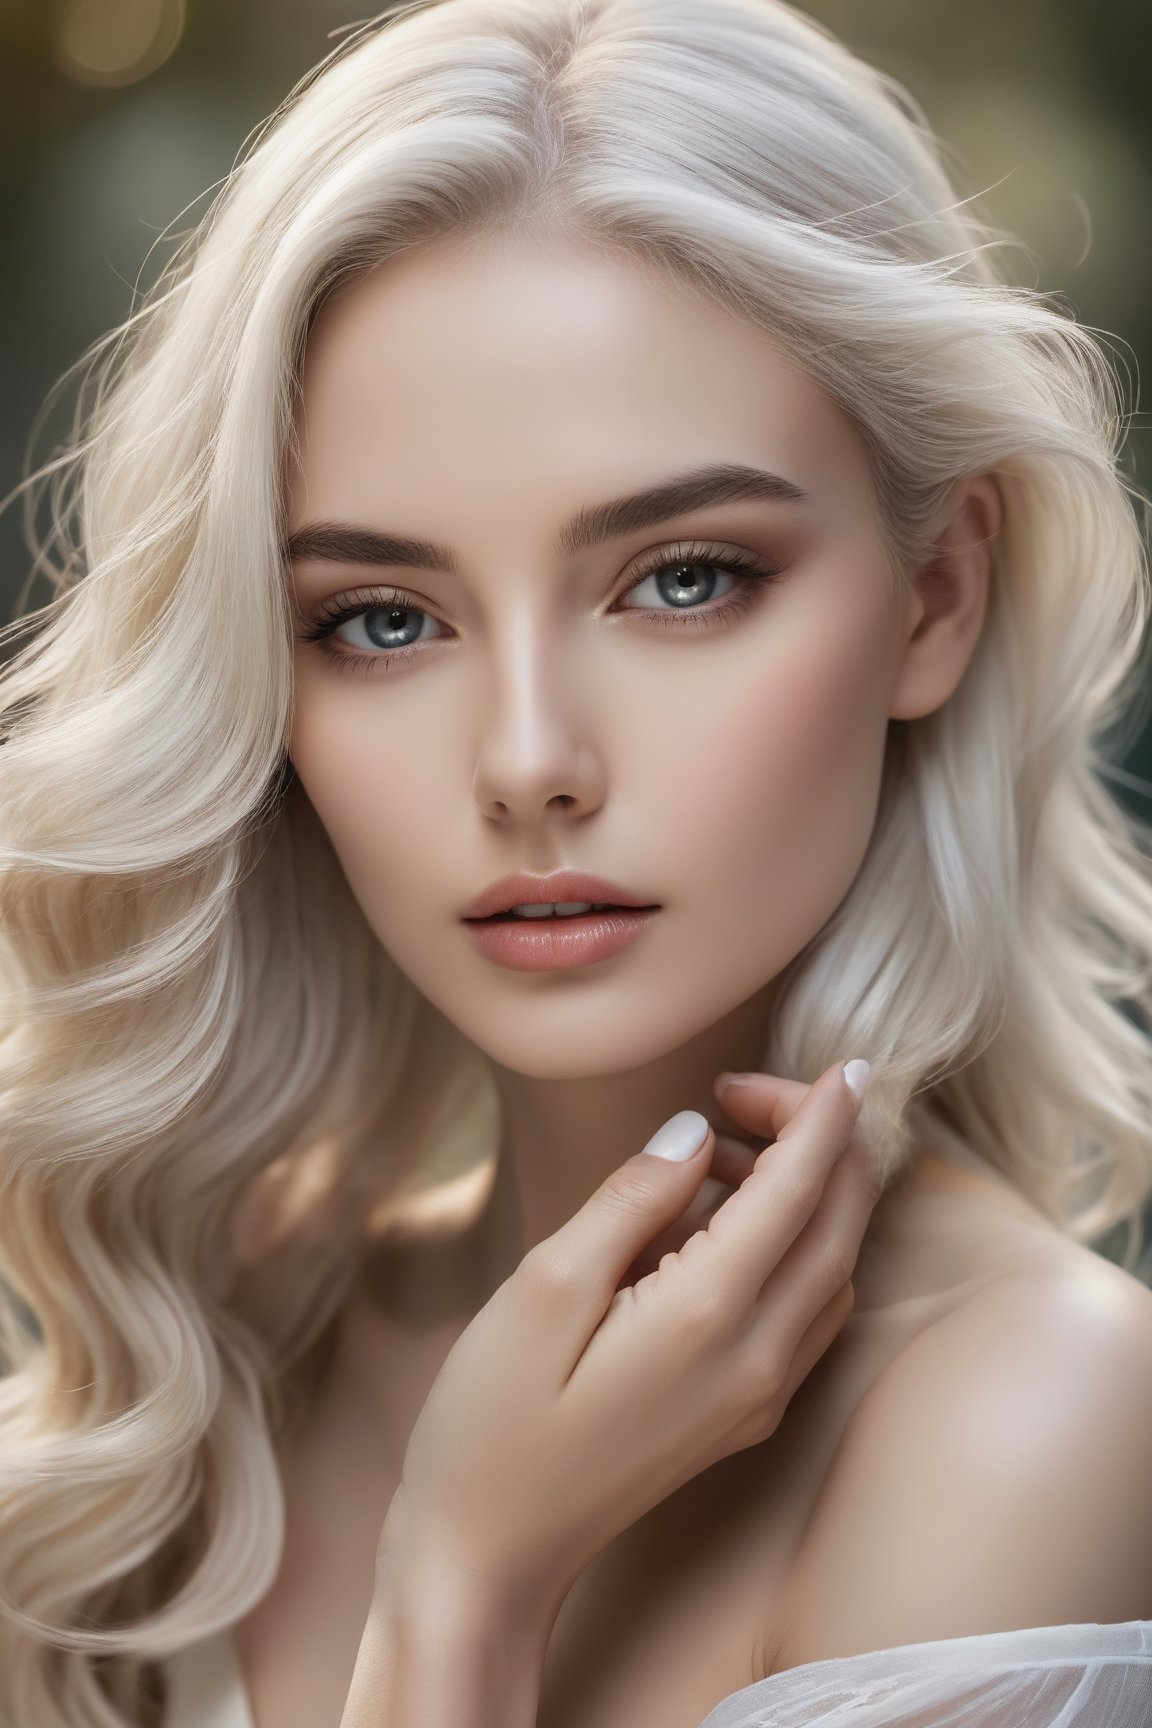 A serene, soft-focused portrait of a statuesque model, gazing directly into the lens. She carefully applies a thin layer of cosmetic cream onto her porcelain-like complexion, her slender hand moving deliberately as if in slow motion. The creamy substance lies flat on her skin, subtly highlighting its natural texture. Long, silken white hair cascades down her back like a river of moonlight, framing her ethereal features.